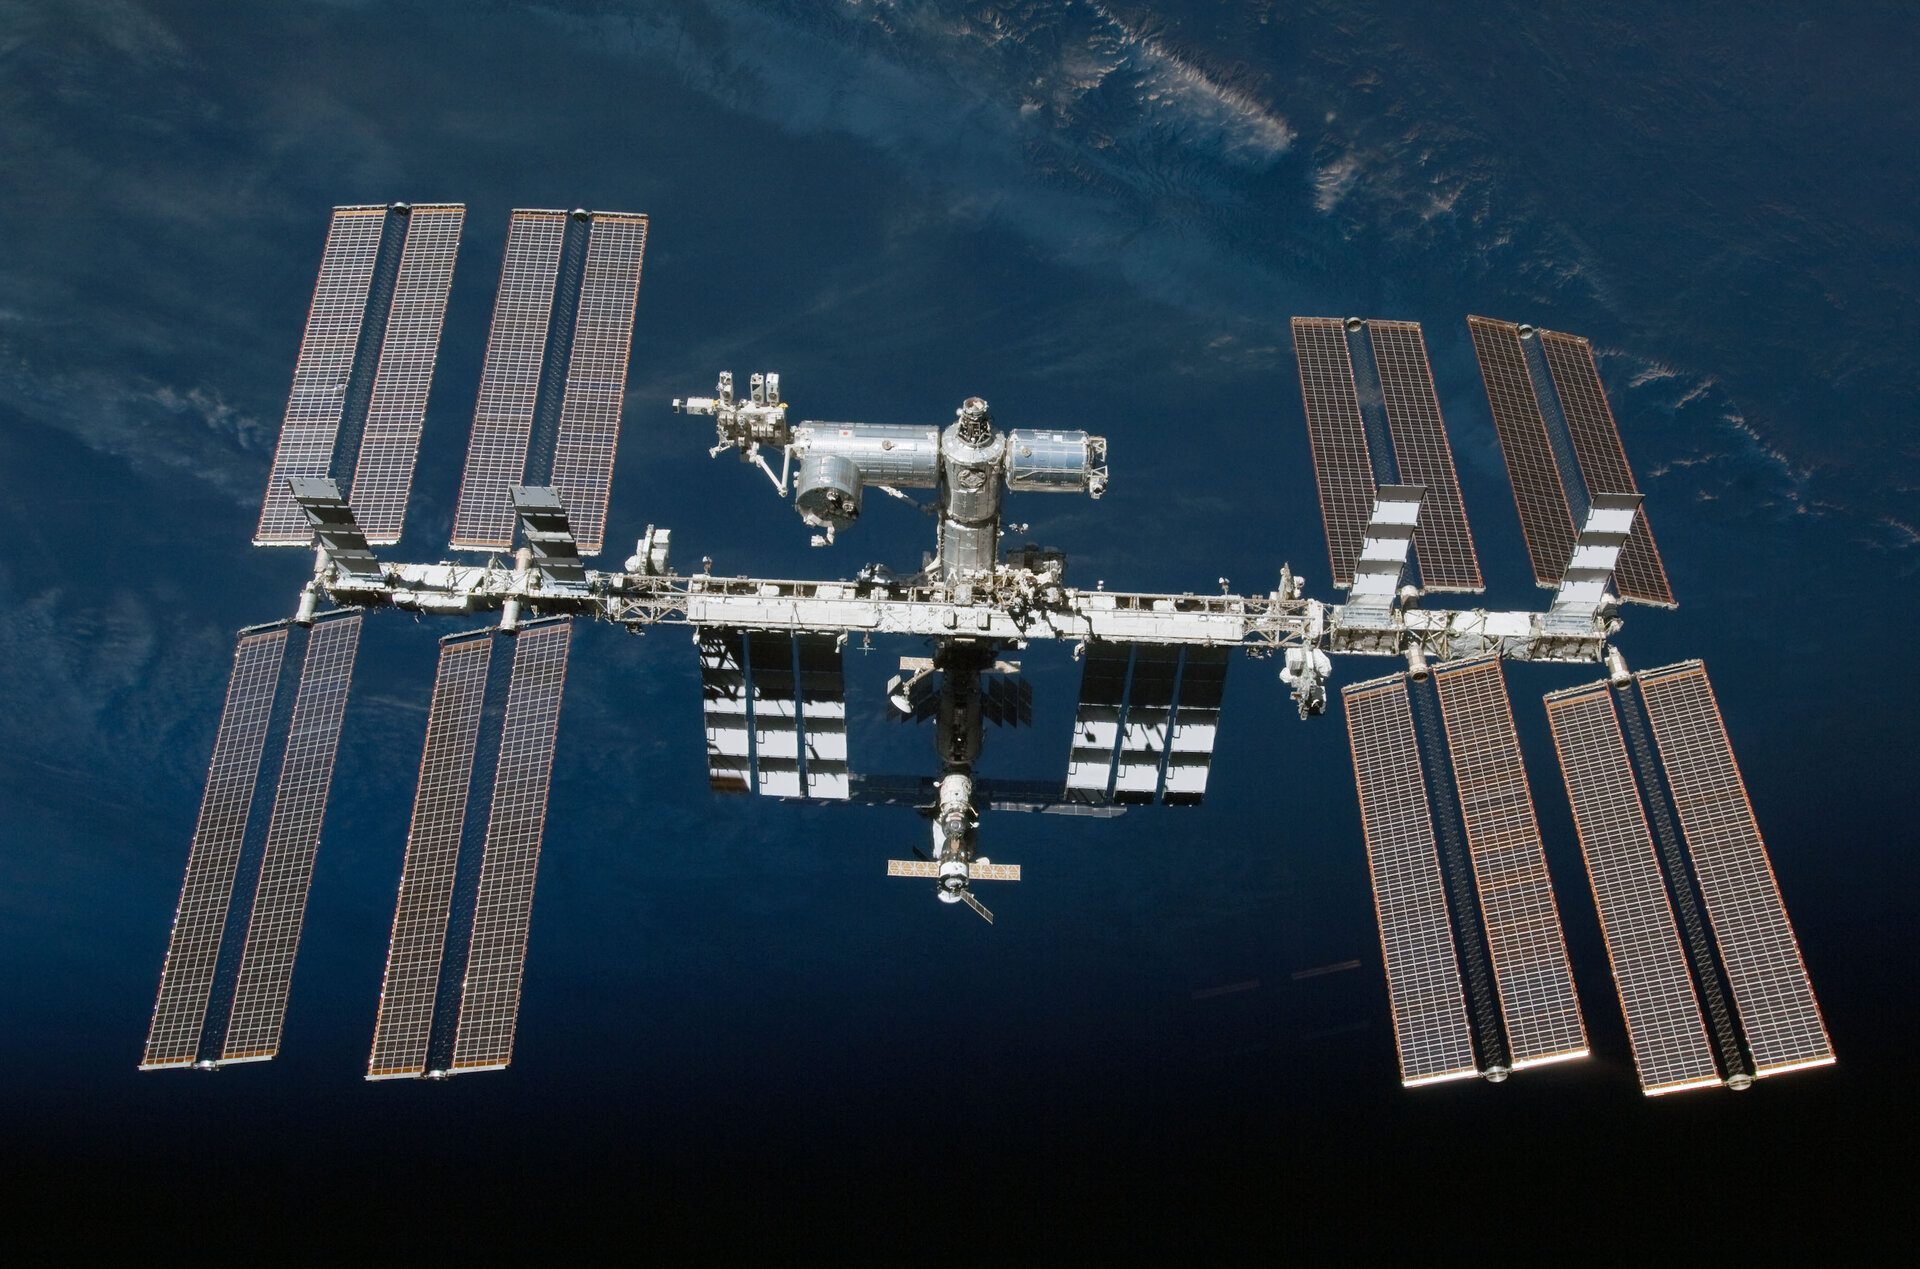 The International Space Station today